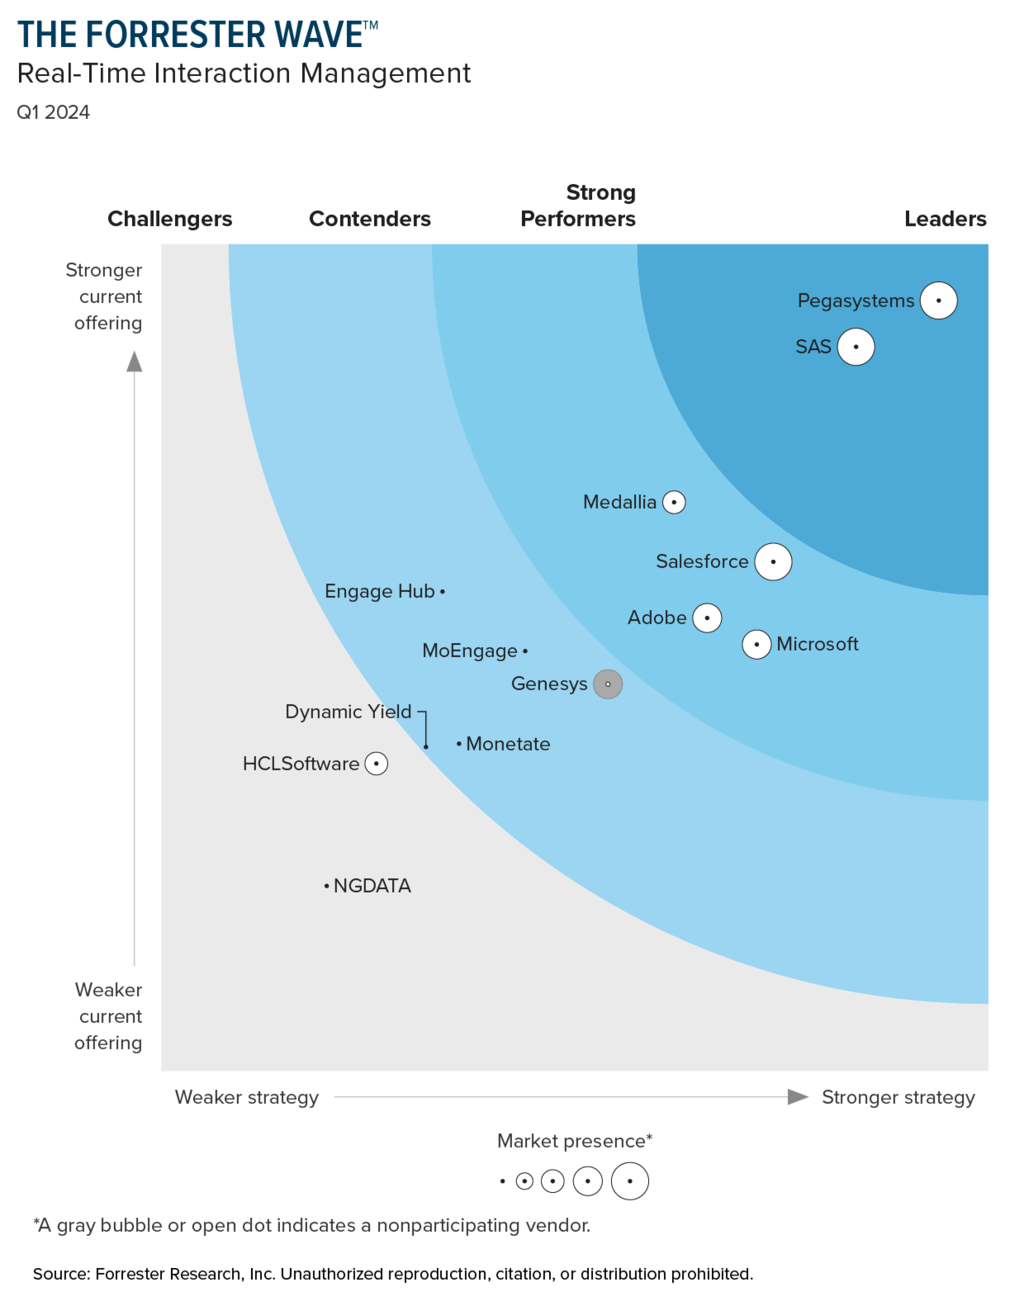 Forrester Wave: Real-Time Interaction Management (RTIM) Q1 2024 graphic